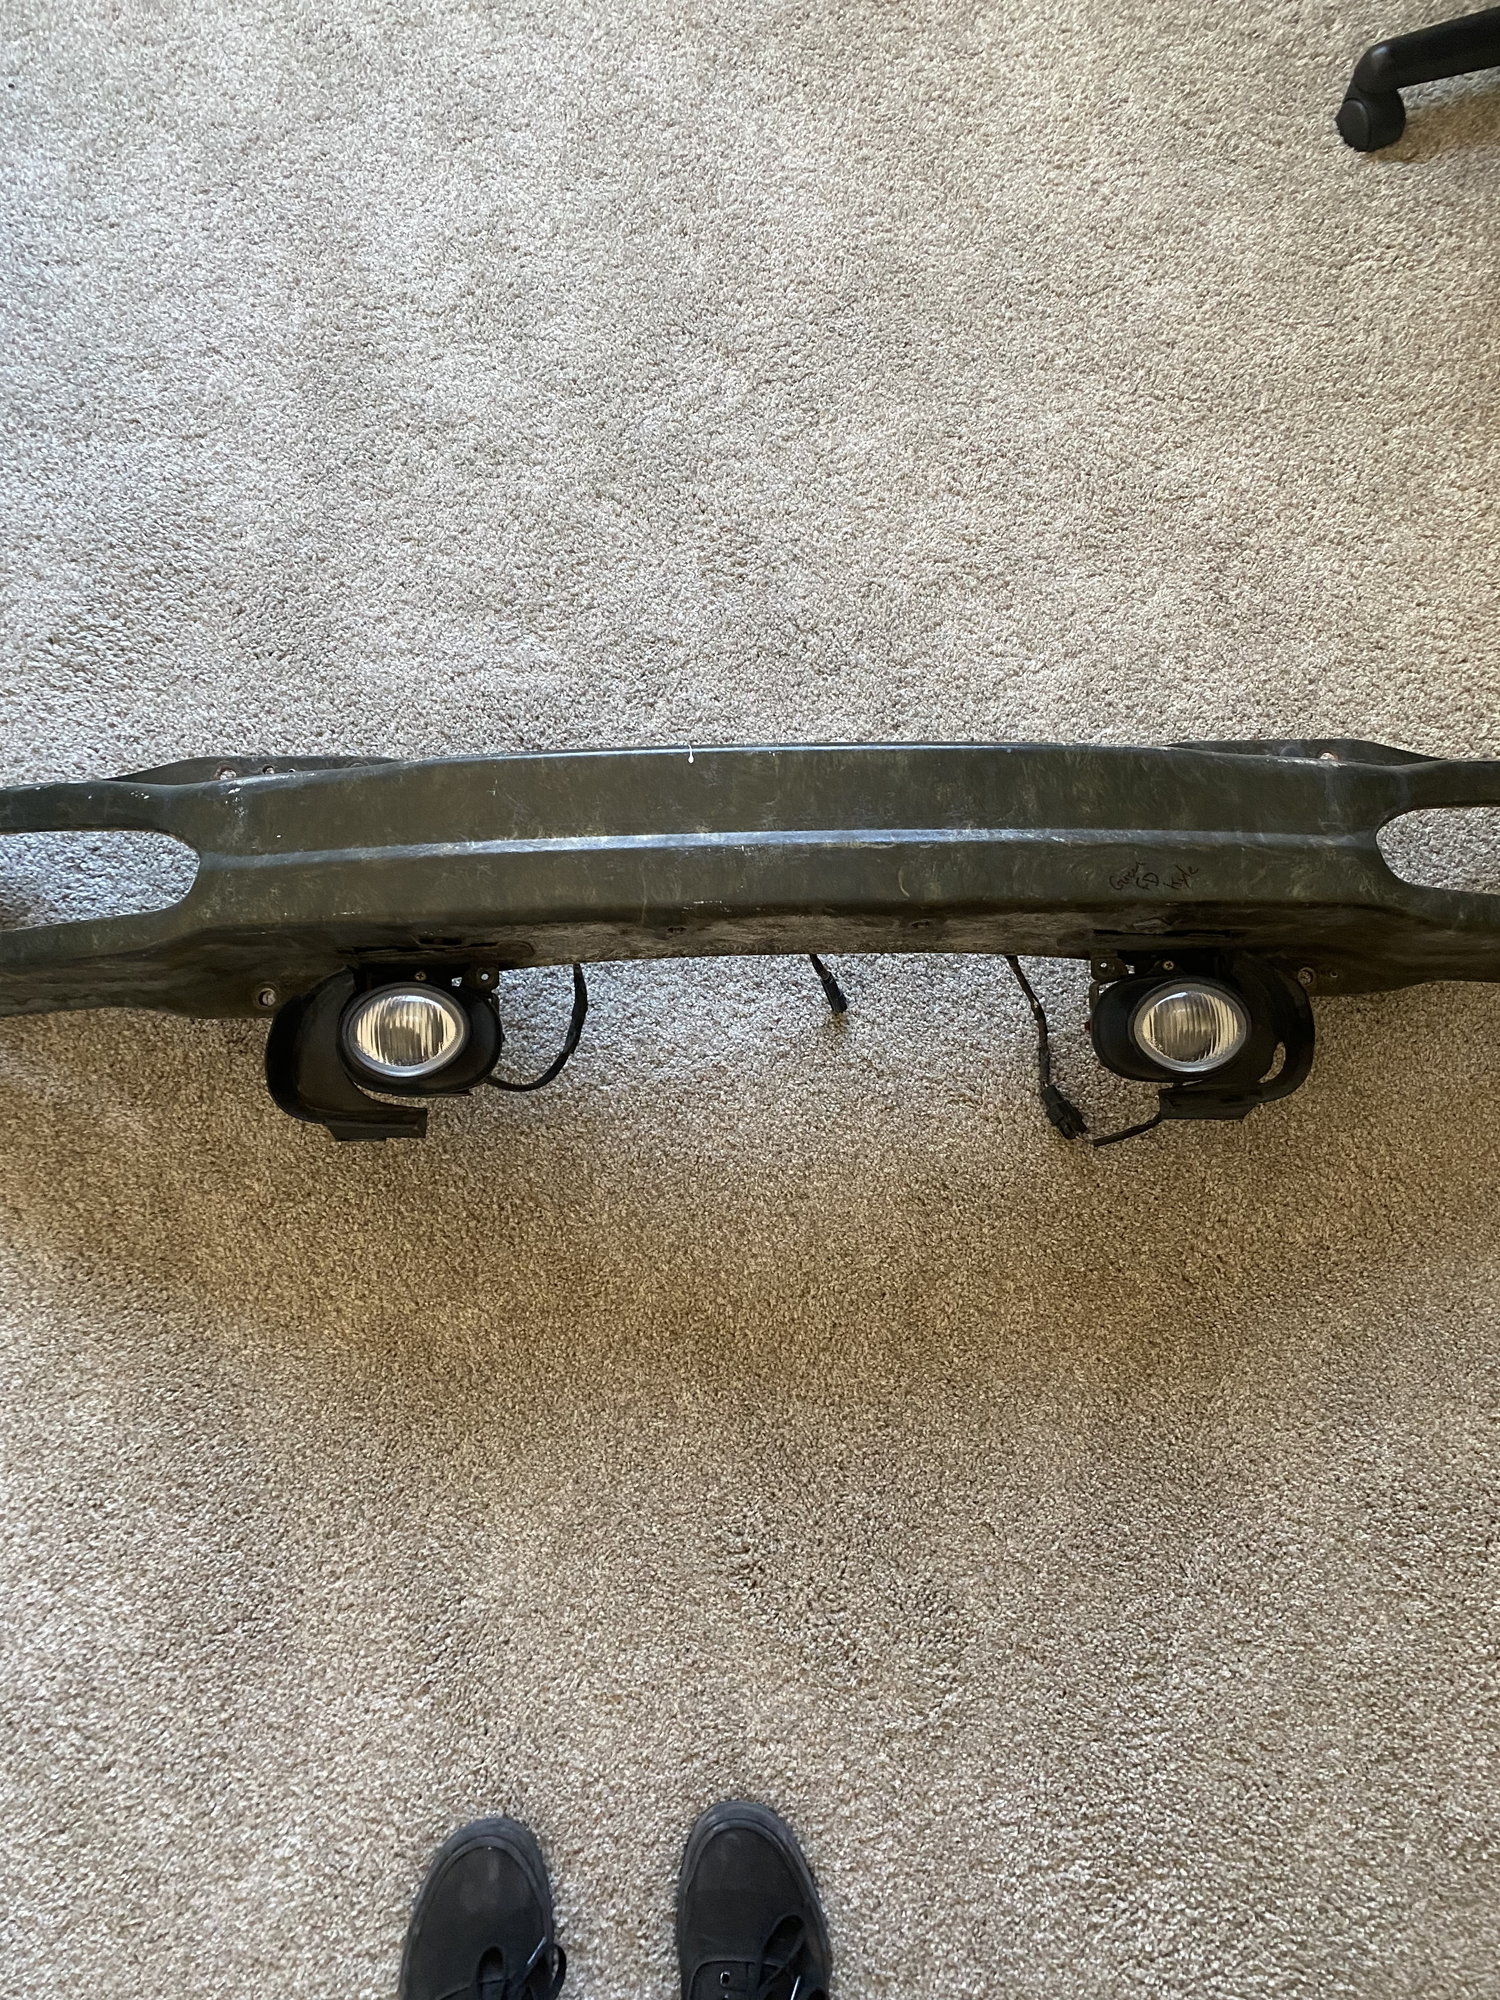 Exterior Body Parts - 1993 rx7 reinforcement crash bar - Used - 1993 to 2002 Mazda RX-7 - Reno, NV 89521, United States